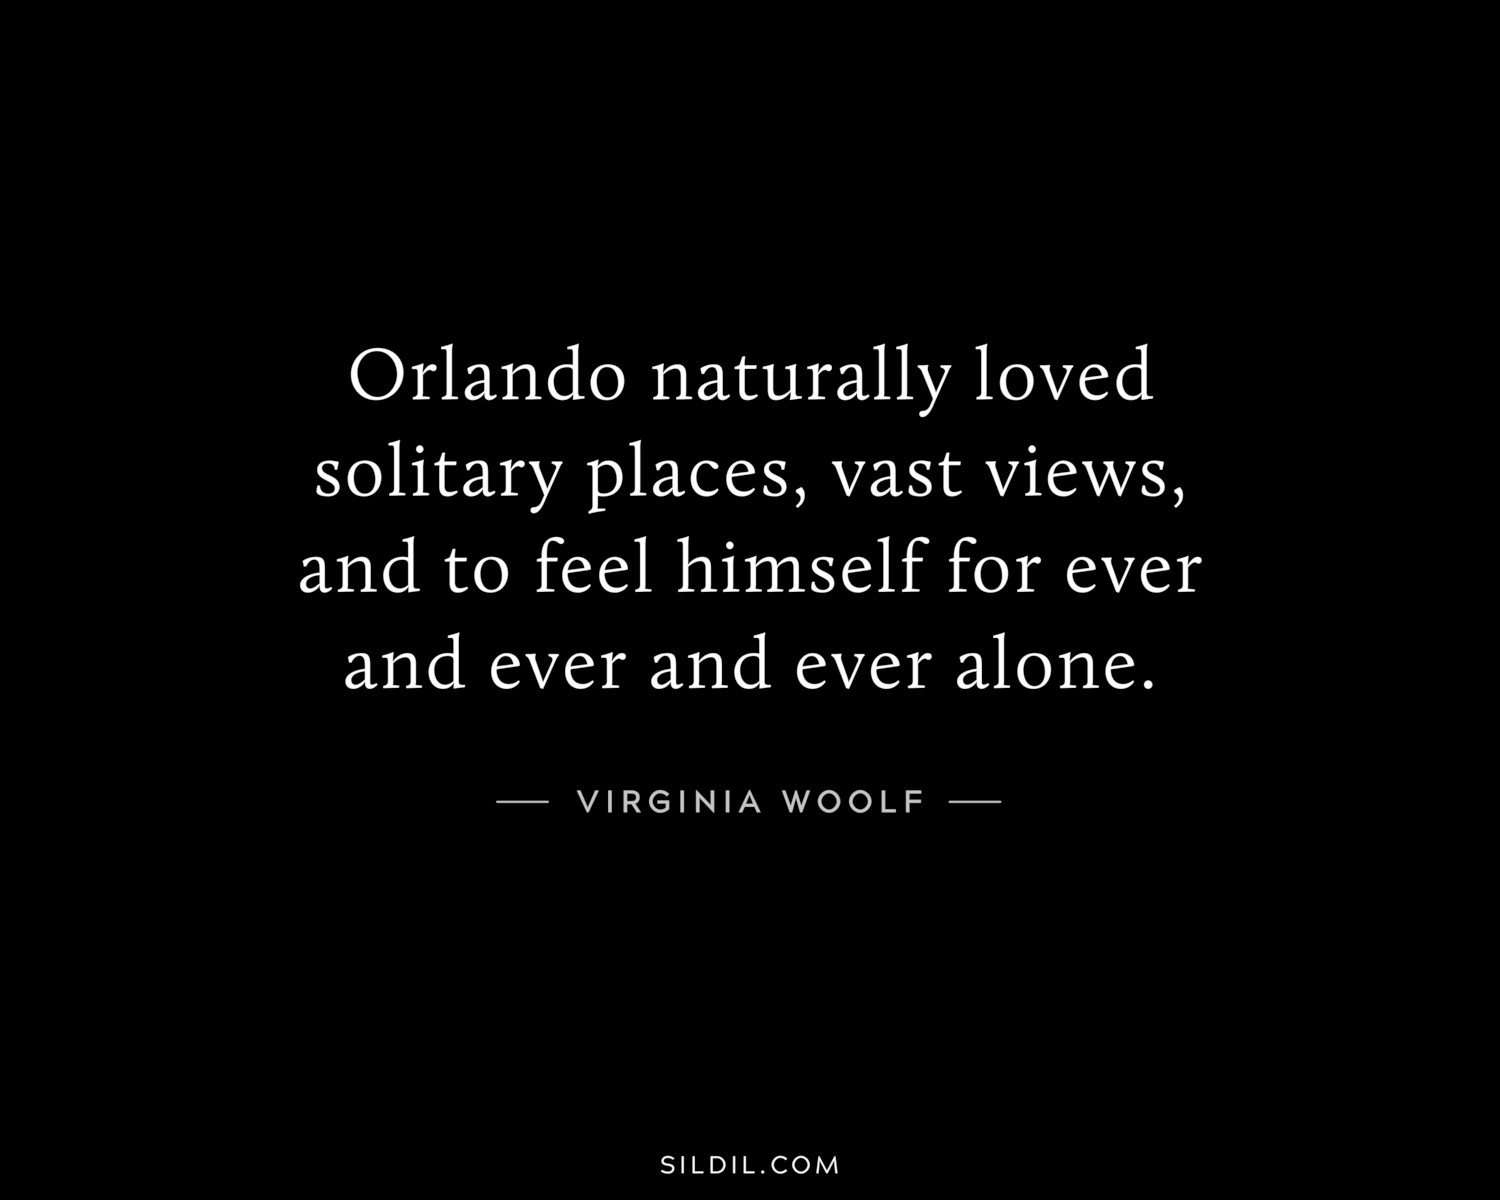 Orlando naturally loved solitary places, vast views, and to feel himself for ever and ever and ever alone.